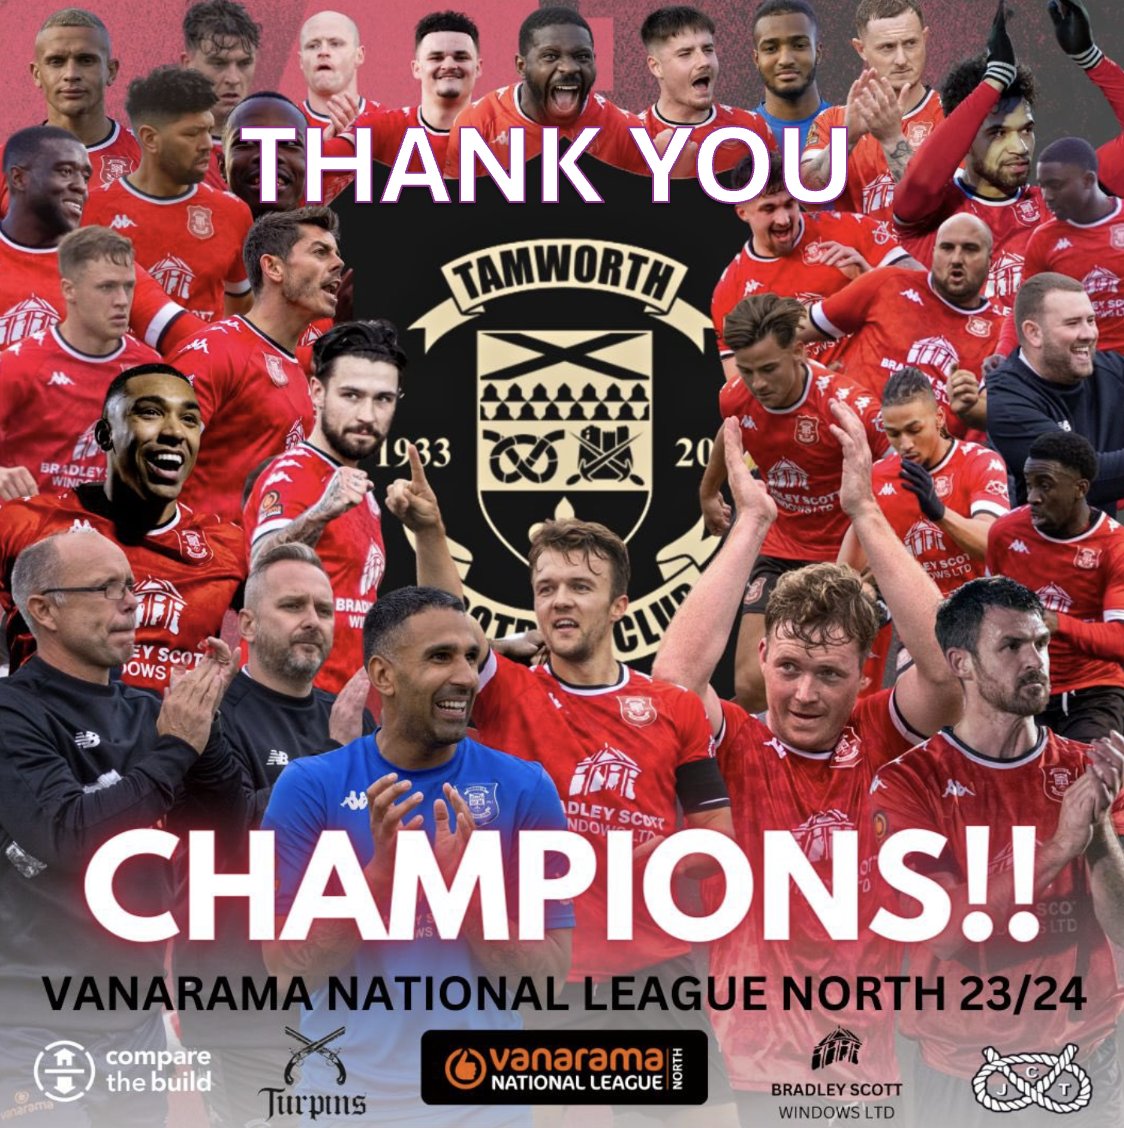 THANK YOU | We have been overwhelmed by the many kind messages received from fellow clubs in the @TheVanaramaNL, other leagues, supporters, opposition supporters, former players and managers too. It has been a special day for us and we are very grateful. #BristolStreetMotors